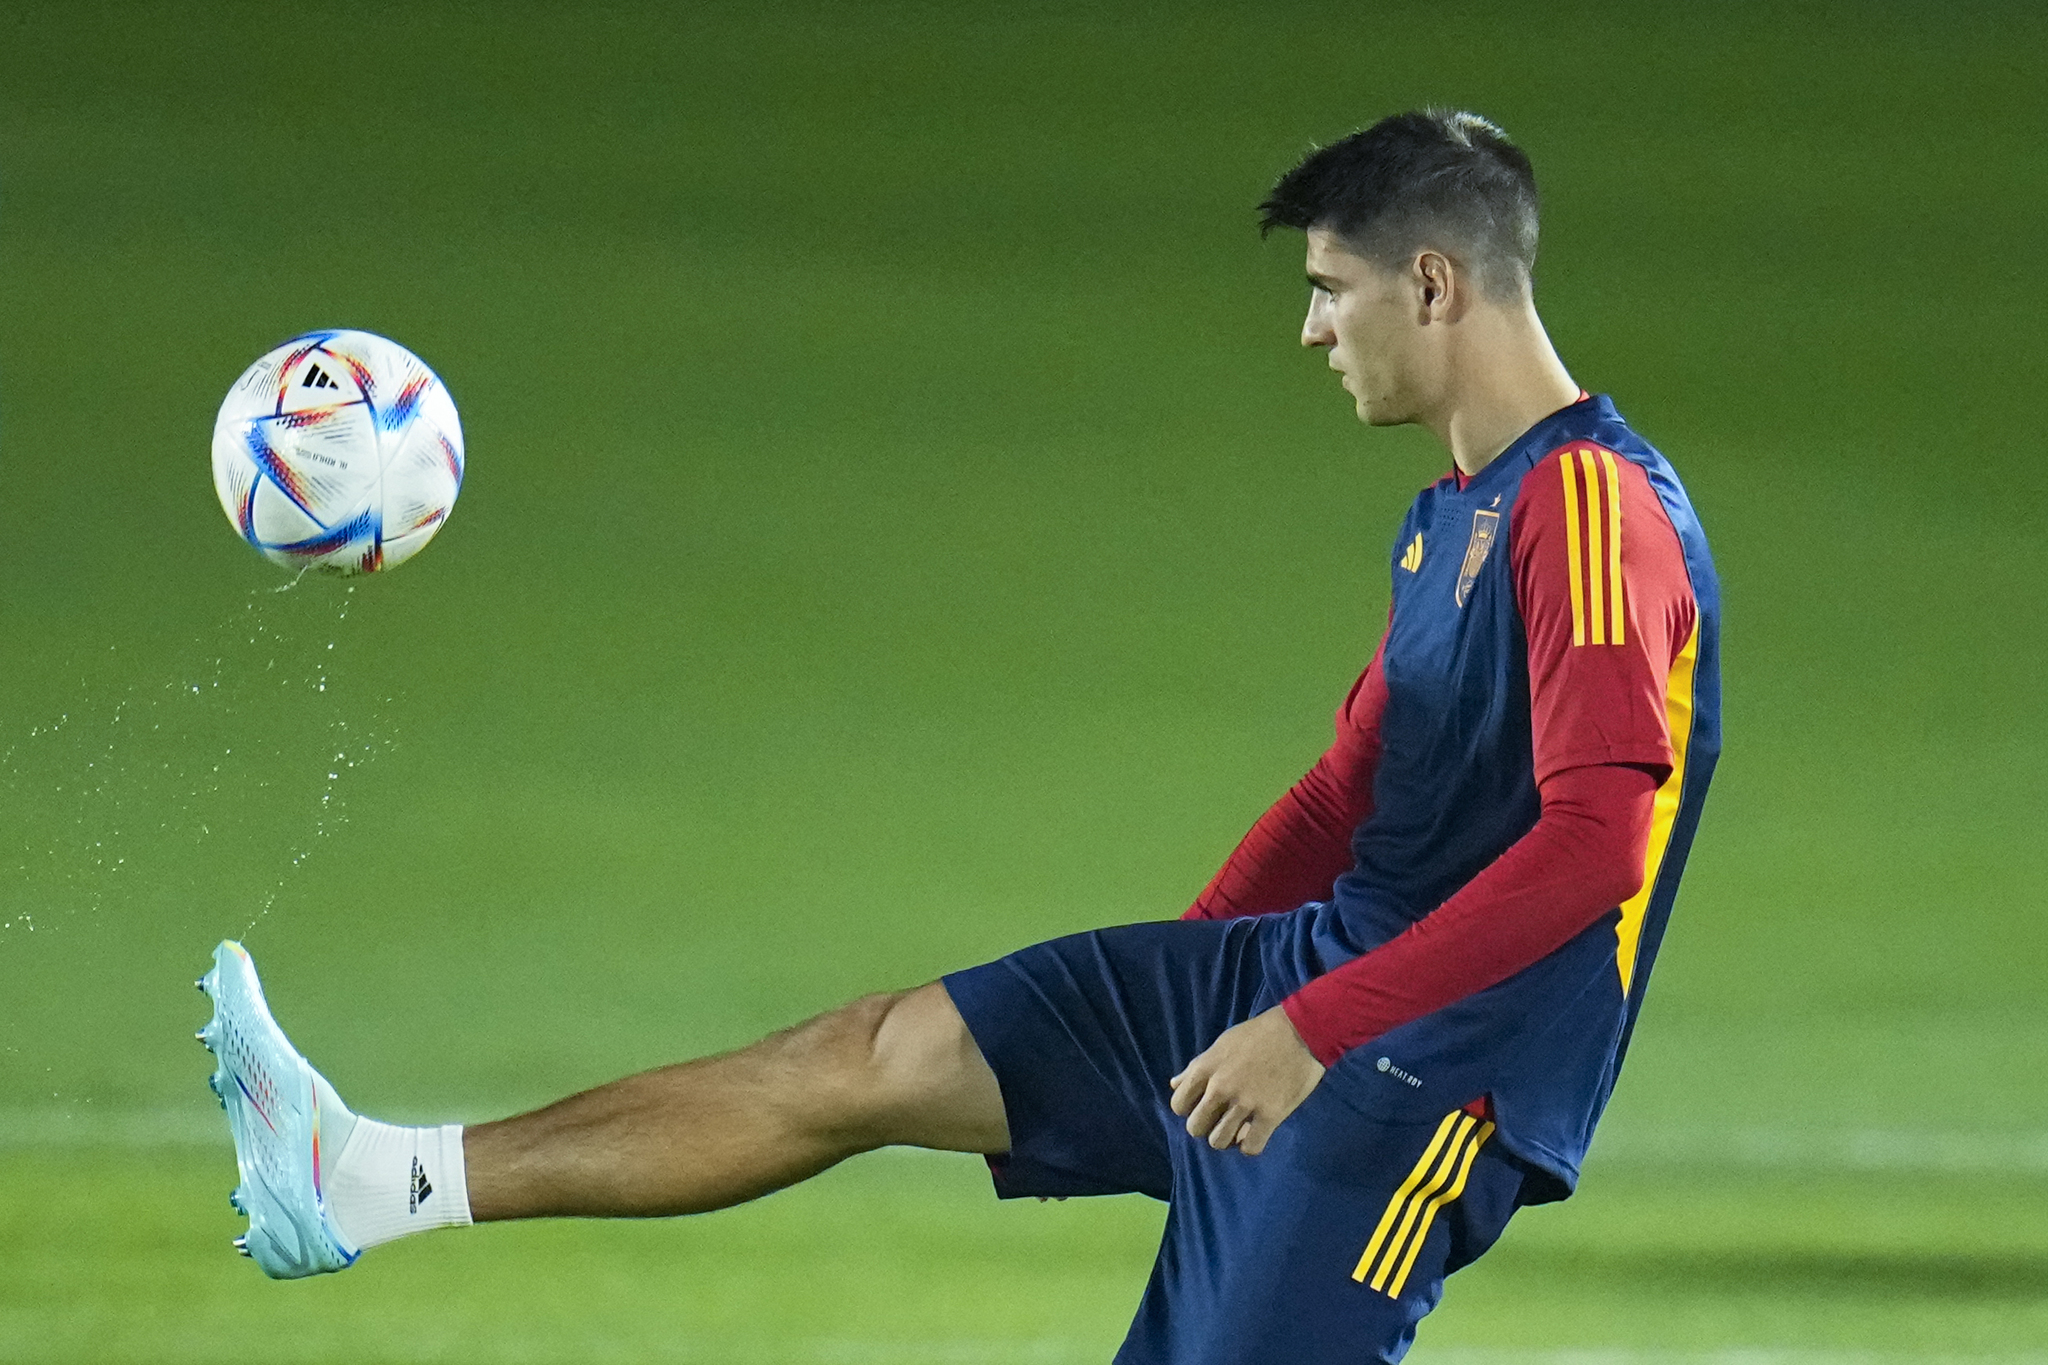 Spain's Alvaro lt;HIT gt;Morata lt;/HIT gt; works out during a training session at Qatar University, in Doha, Qatar, Tuesday, Nov. 22, 2022. Spain will play its first match in Group E in the World Cup against Costa Rica on Nov. 23. (AP Photo/Julio Cortez)